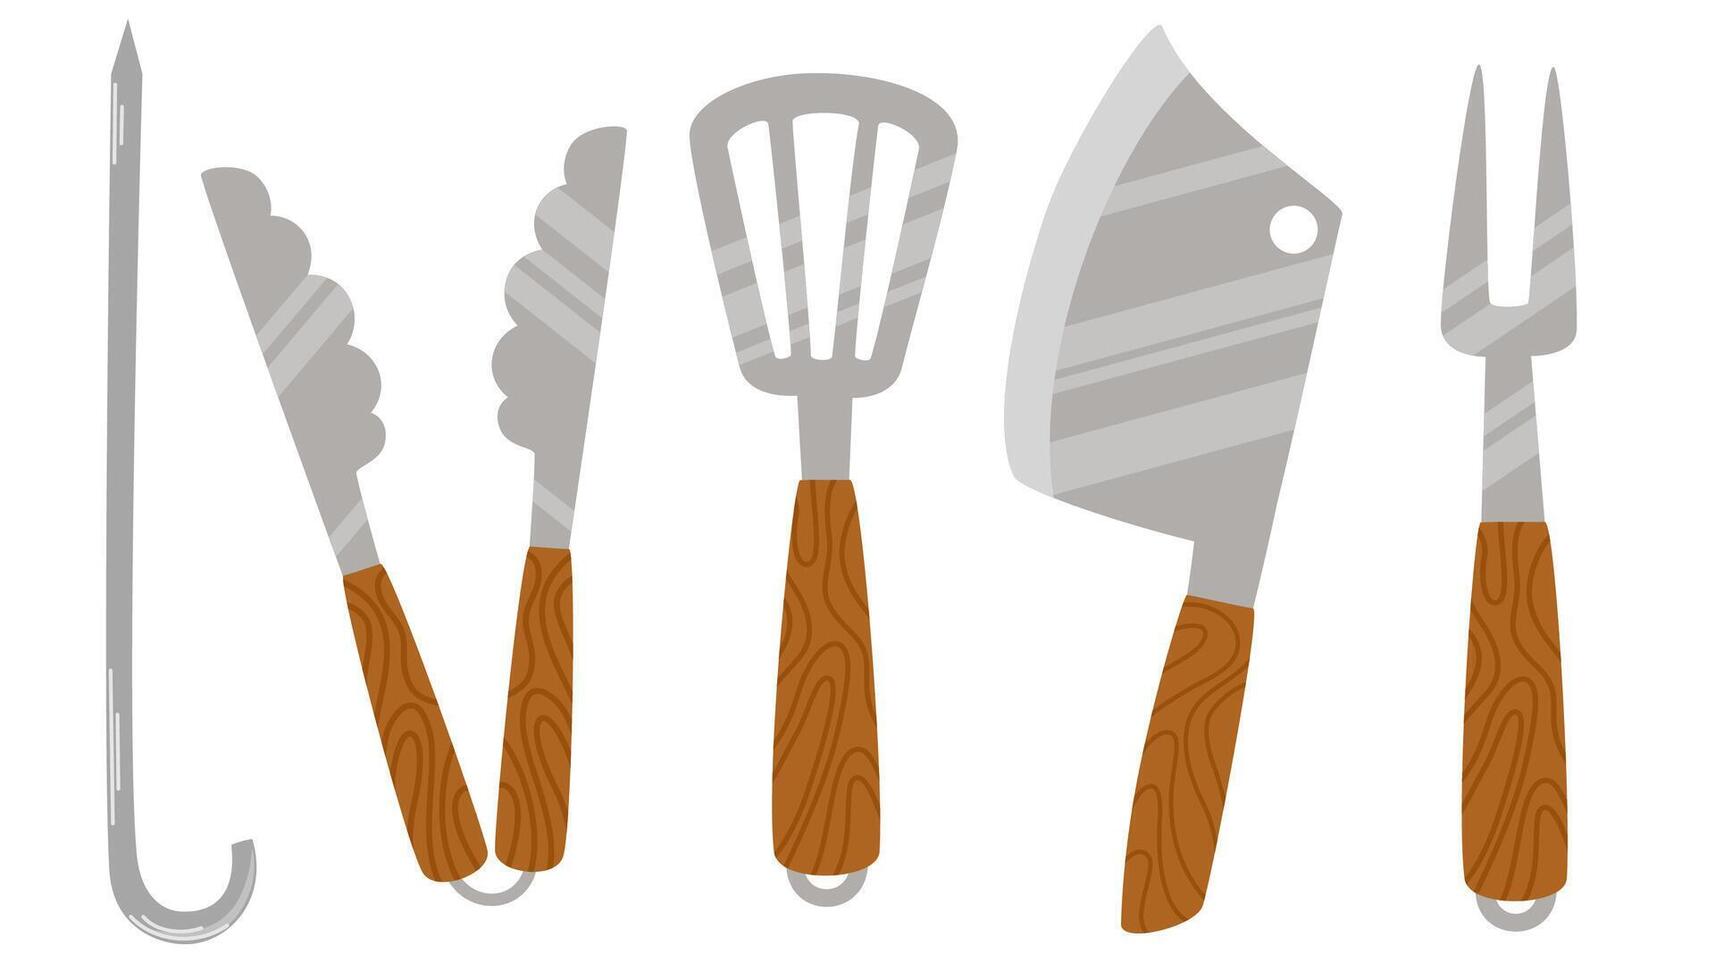 BBQ tools set. Grilling utensils, metal knife, tongs, spatula, fork and skewers for barbecue meat cooking. Barbeque supplies kit. Flat vector illustration of cutlery isolated on white background